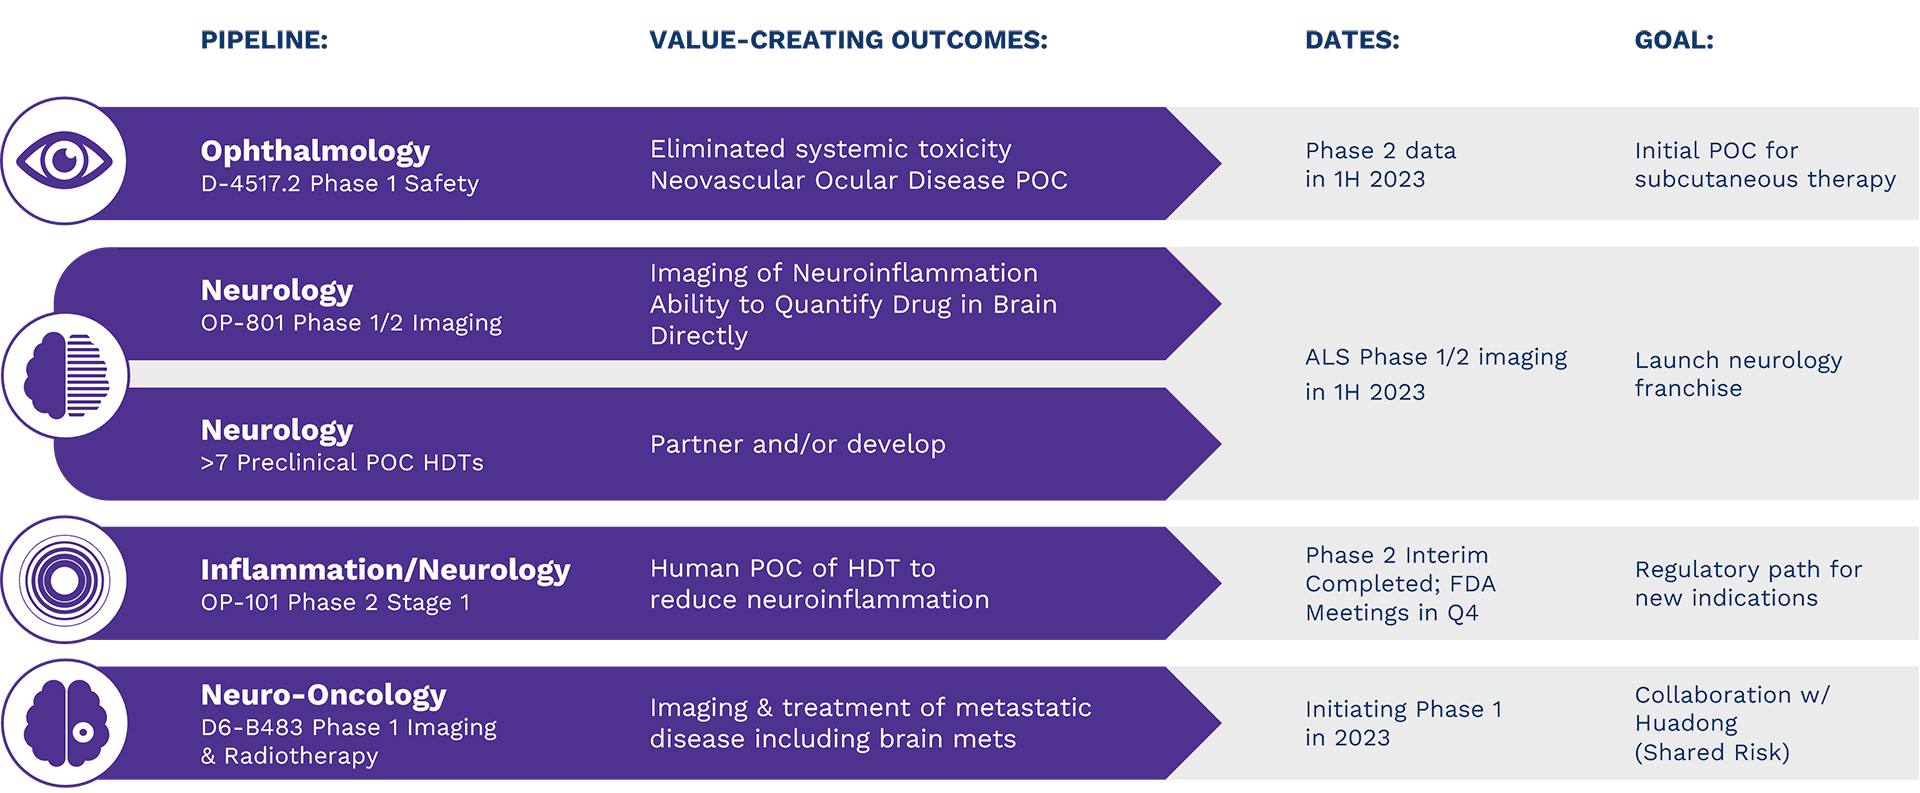 Pipeline: Value-Creating Outcomes